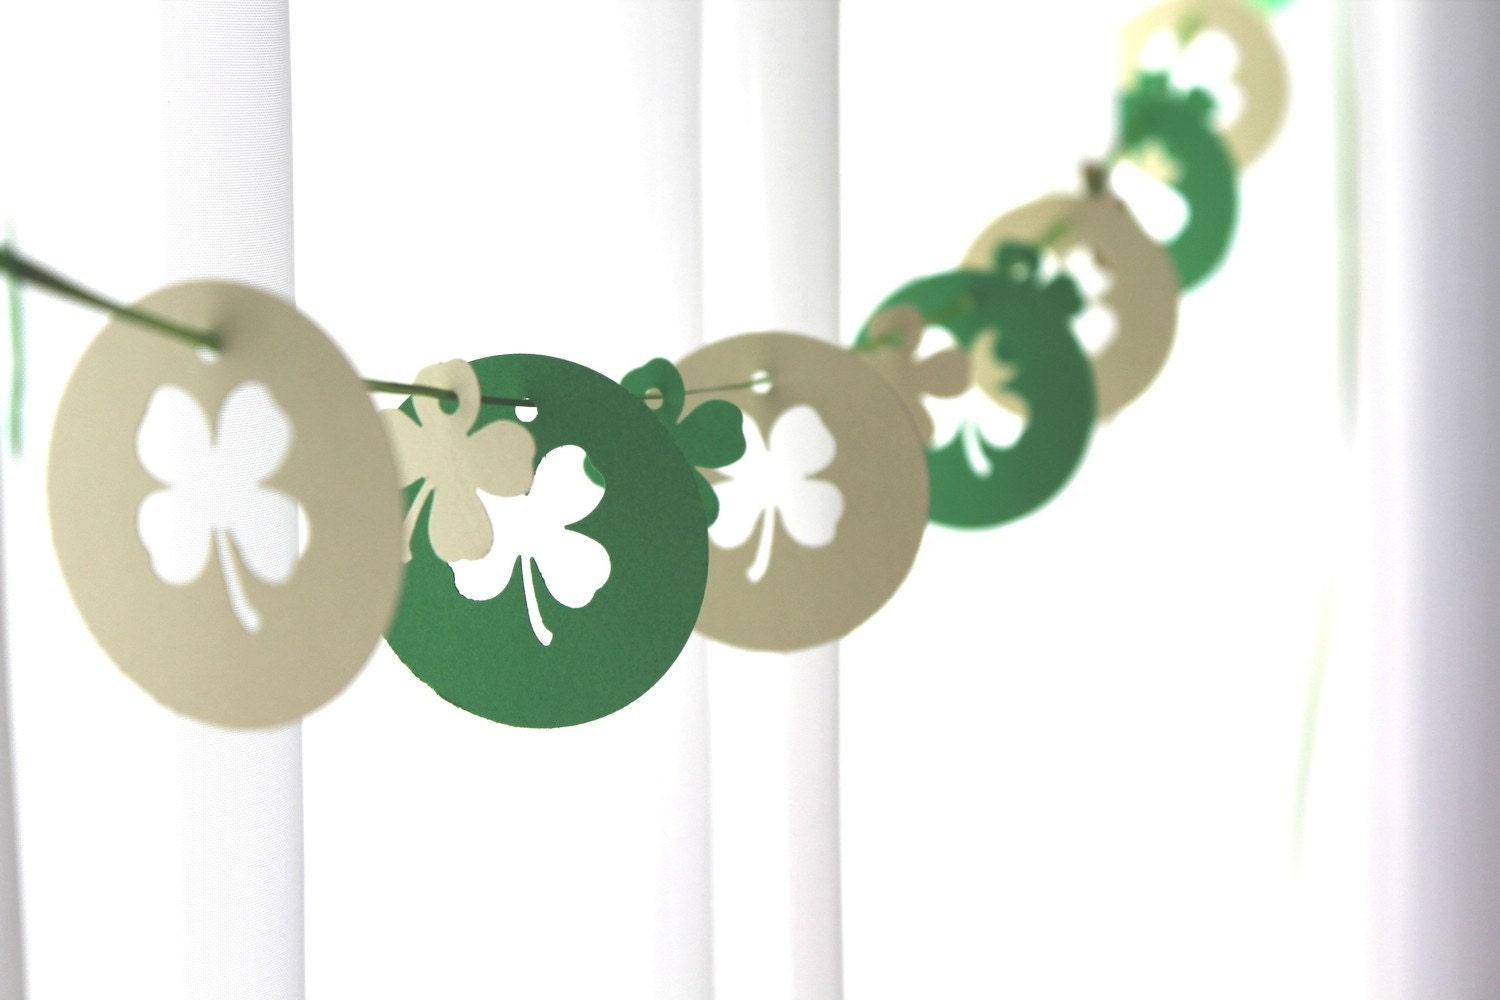 6 Foot - St Patricks Day Shamrocks in Green and White Party Banner Garland perfect for Parties, Bridal or Baby Showers